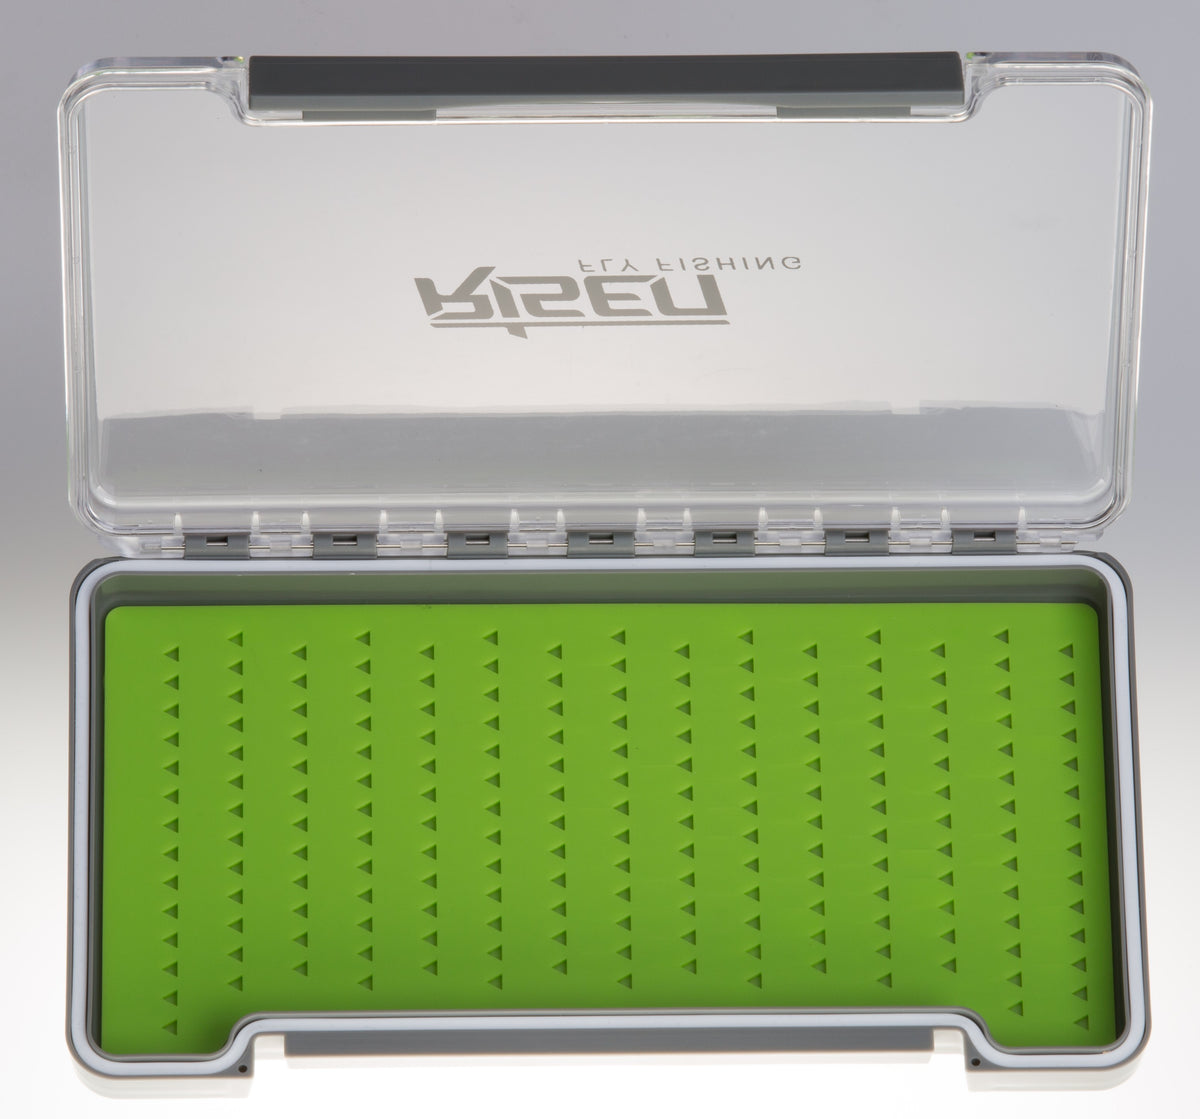 Waterproof fly boxes with green silicone insert – Risen Fly